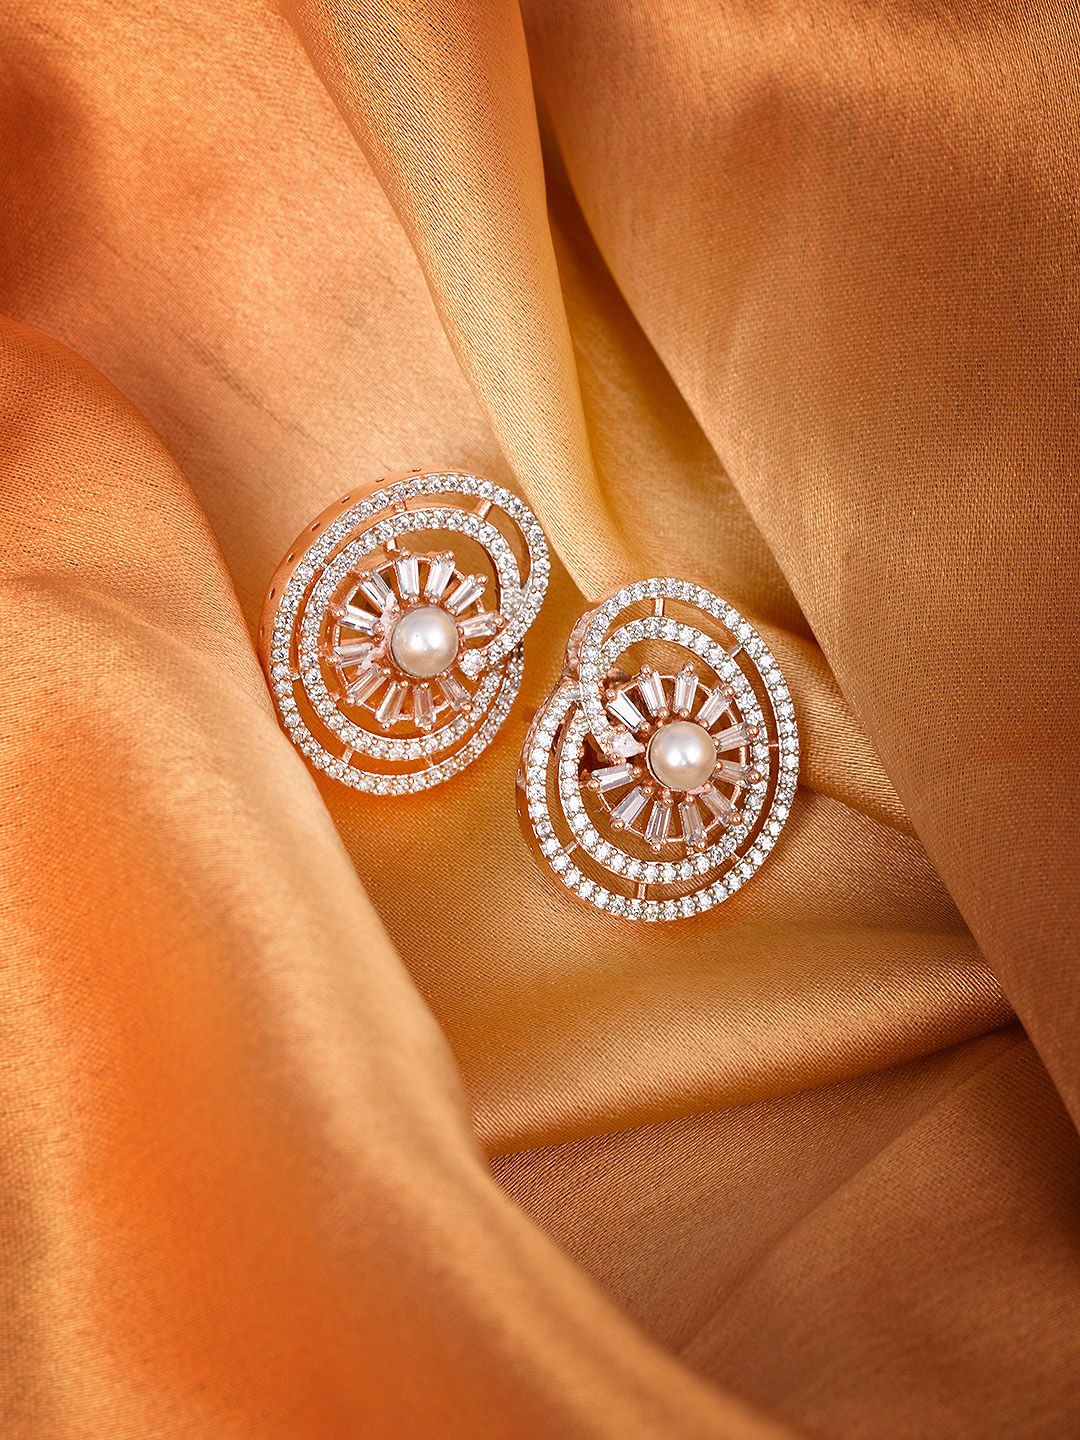 Saraf RS Jewellery White Rose Gold-Plated Contemporary Studs Earrings Price in India